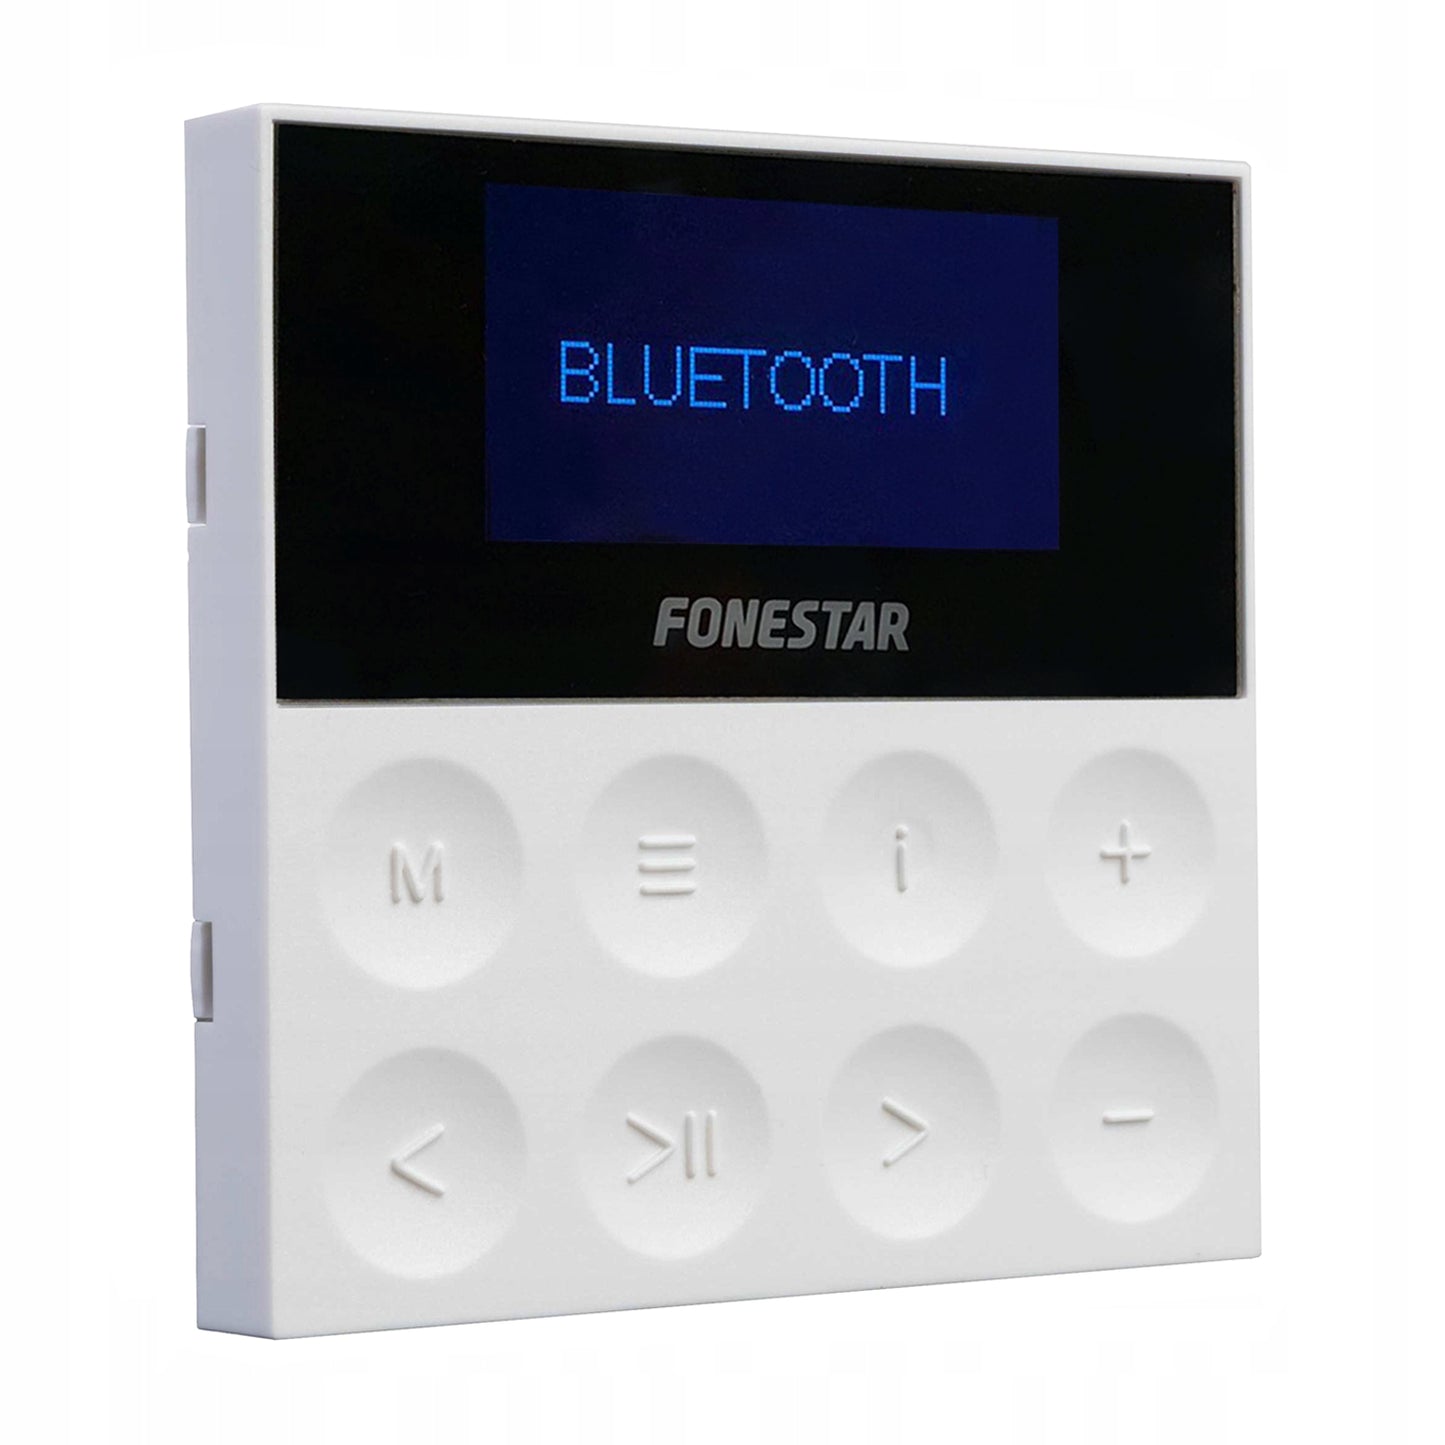 Fonestar KS-AMP Wall-mounted player amplifier audio system, remote control included, Bluetooth, USB, MP3 connectivity, distortion-free